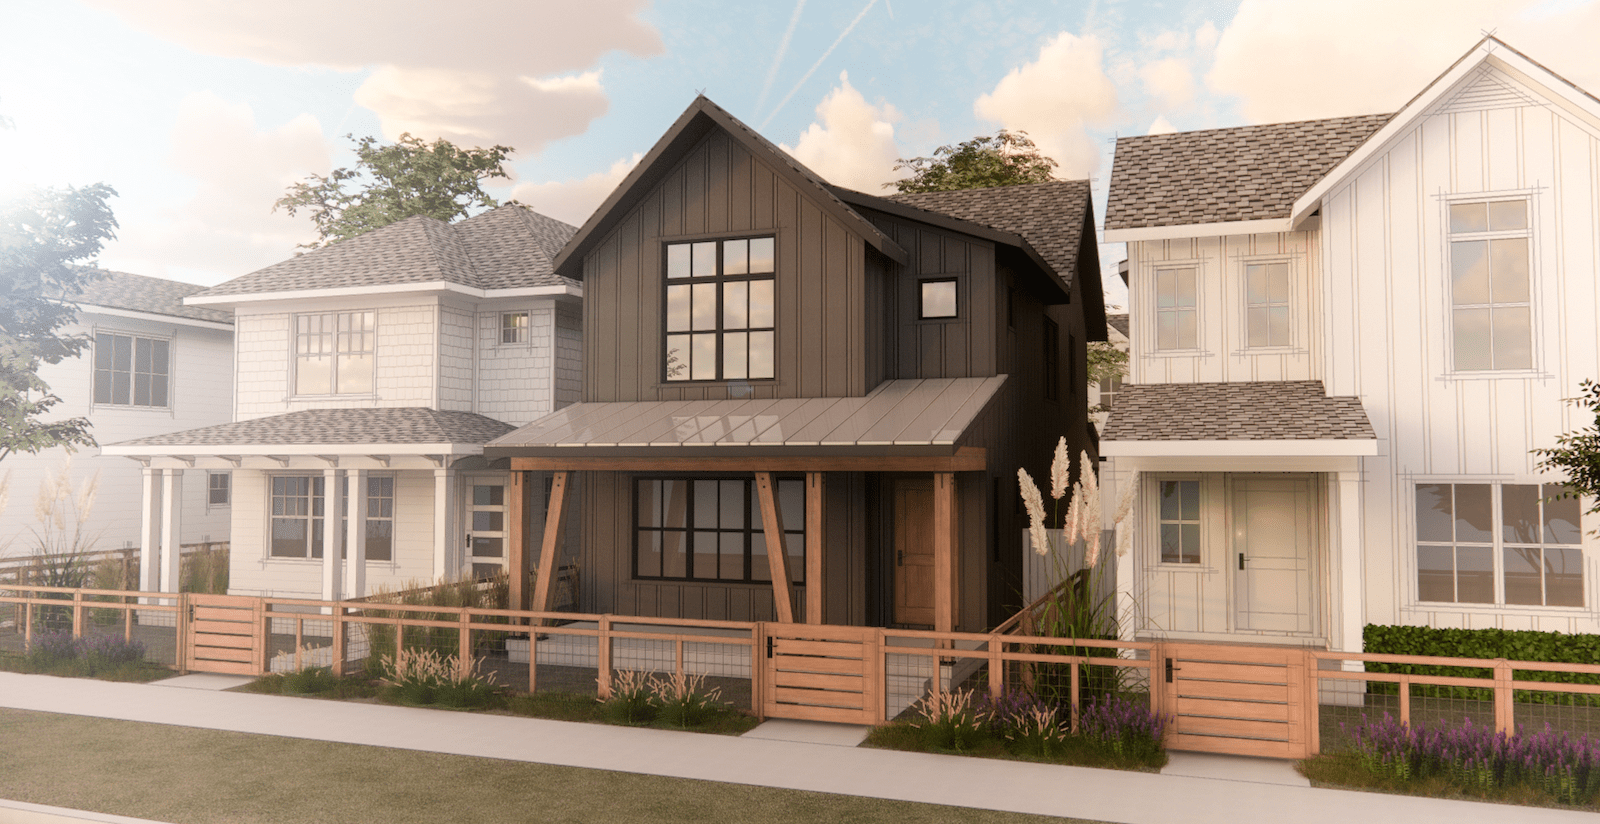 Single Family Detached Home Designs